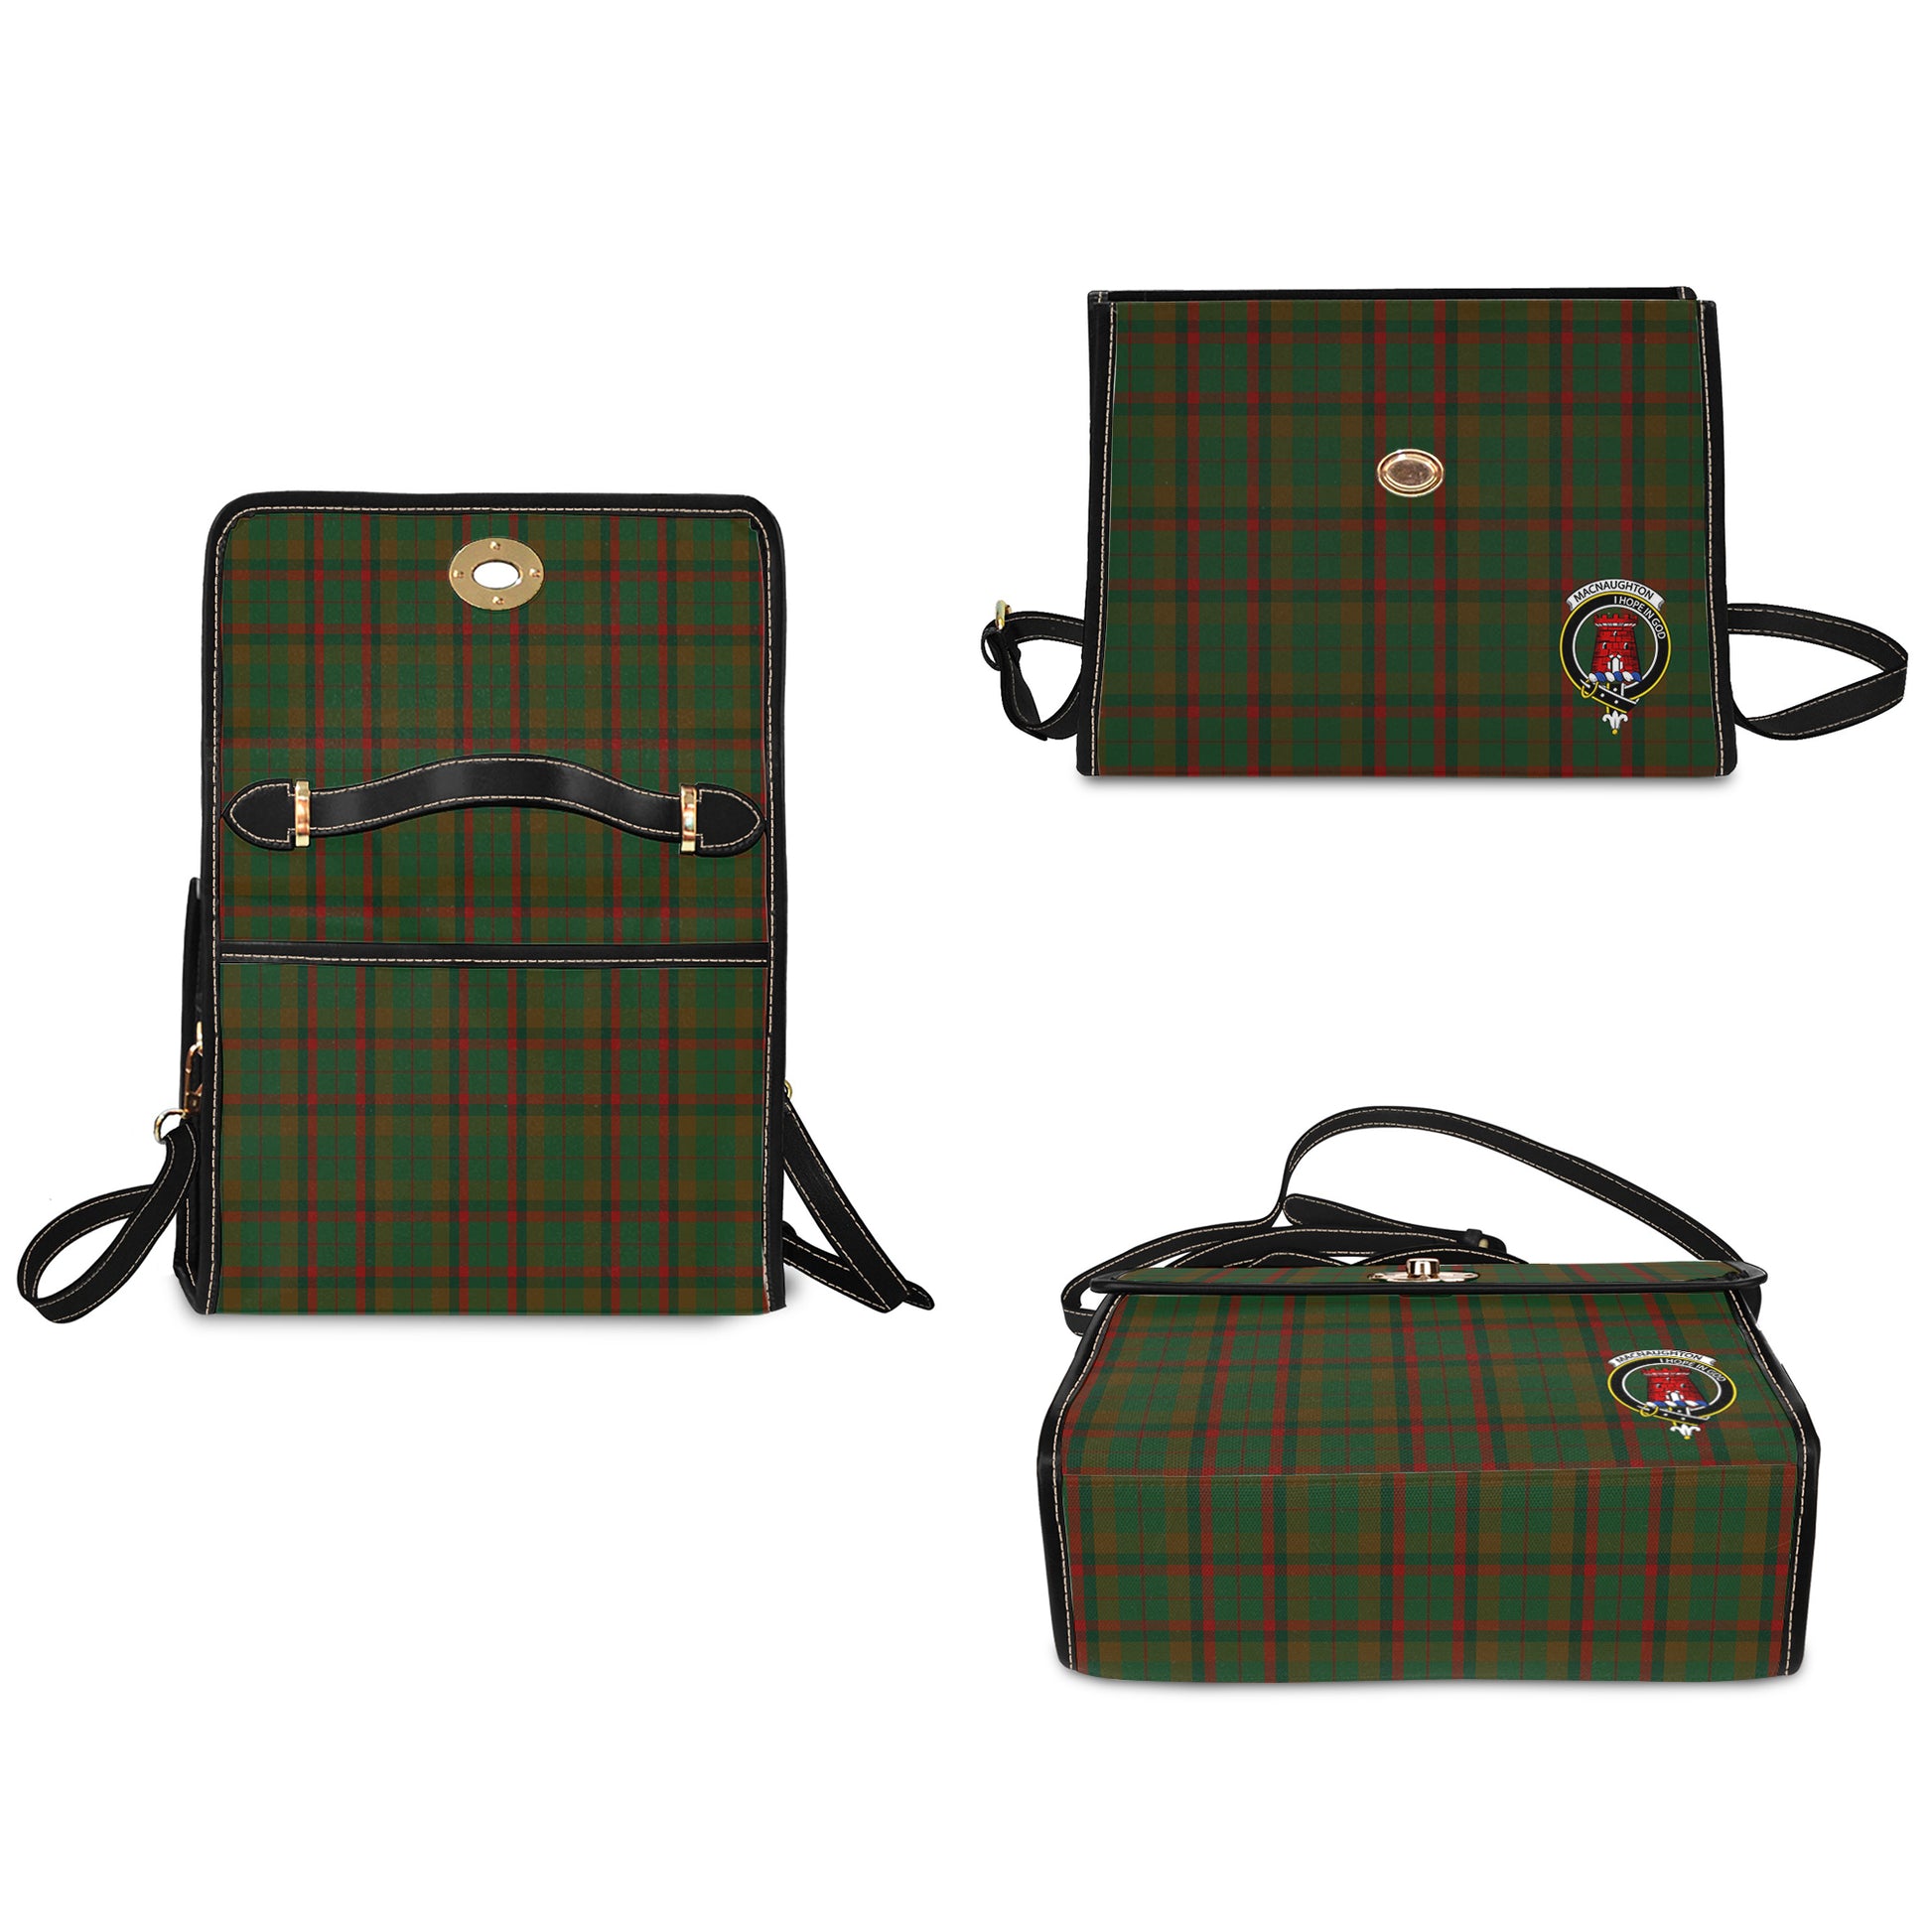 macnaughton-hunting-tartan-leather-strap-waterproof-canvas-bag-with-family-crest